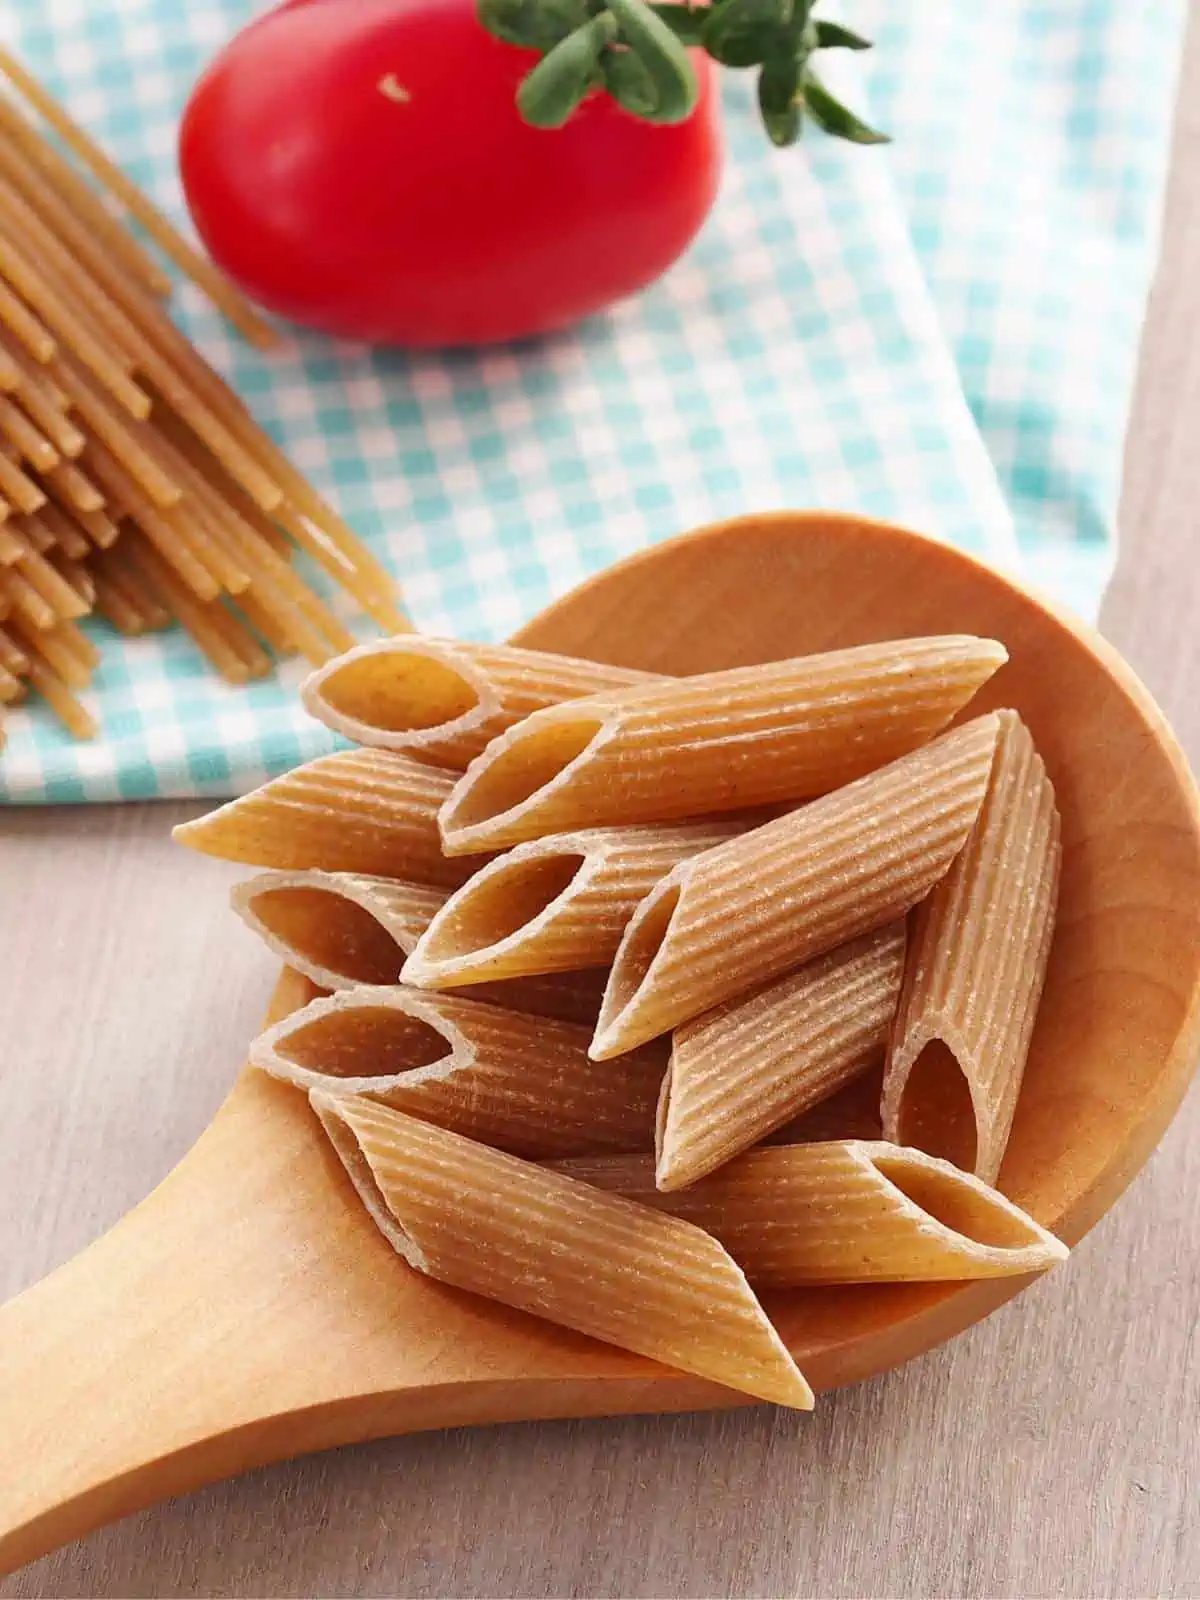 Whole wheat penne pasta on a wooden spoon with whole spaghetti and a tomato behind it.